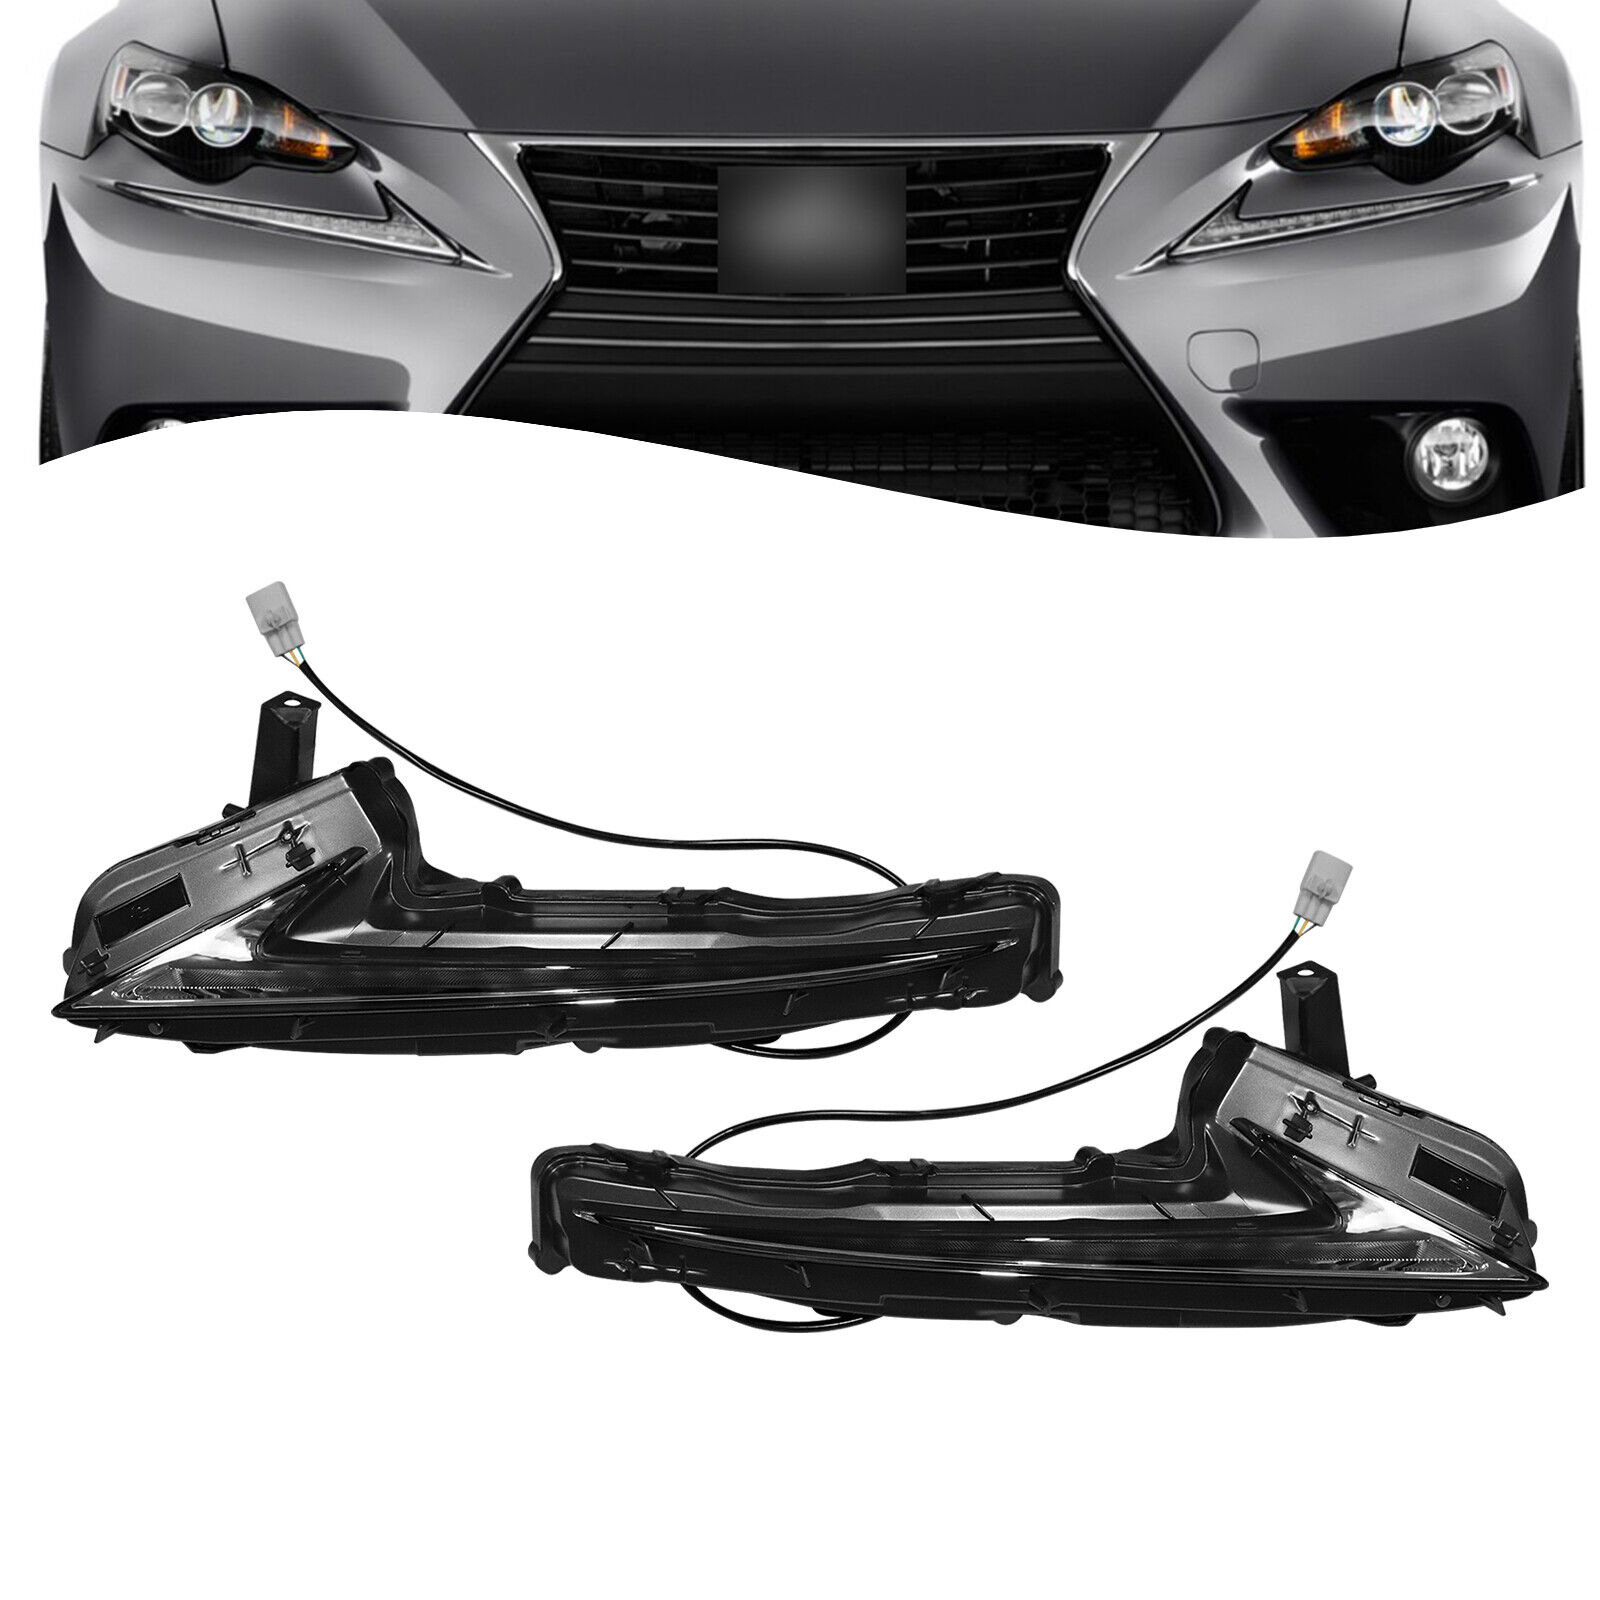 For Lexus 2014-2016 IS200t IS300 IS250 IS350 IS F Daytime Running Lights LED DRL